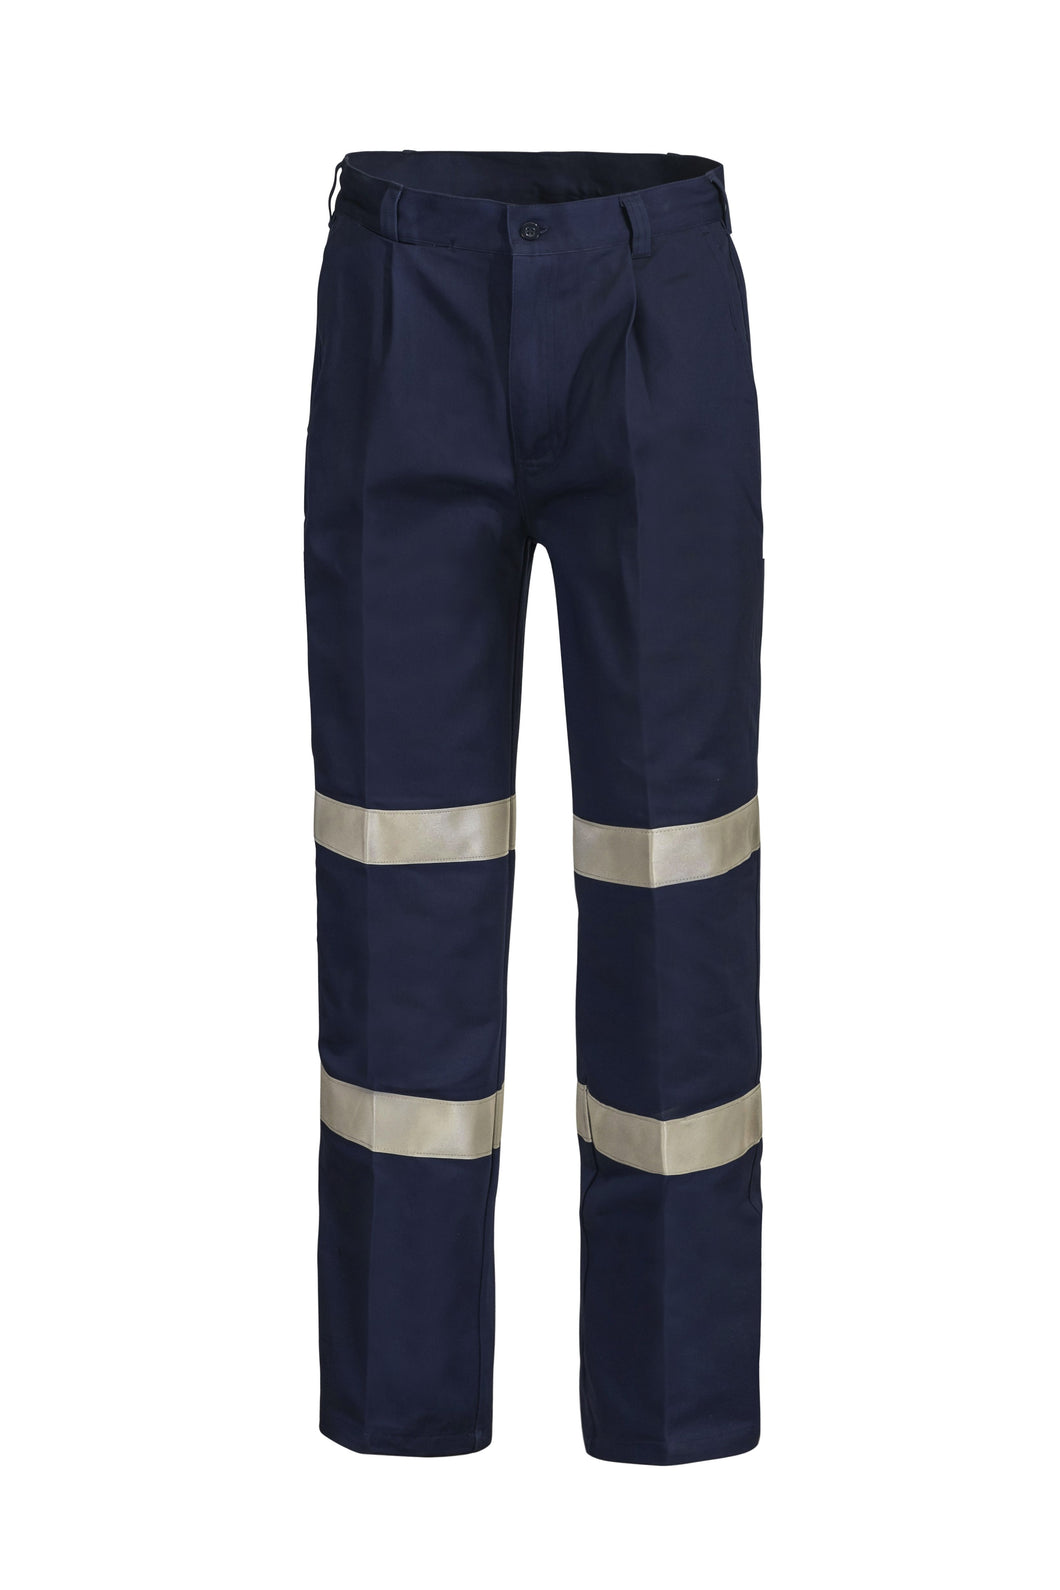 Classic Pleat Cotton Drill Trouser with Industrial Laundry Reflective Tape